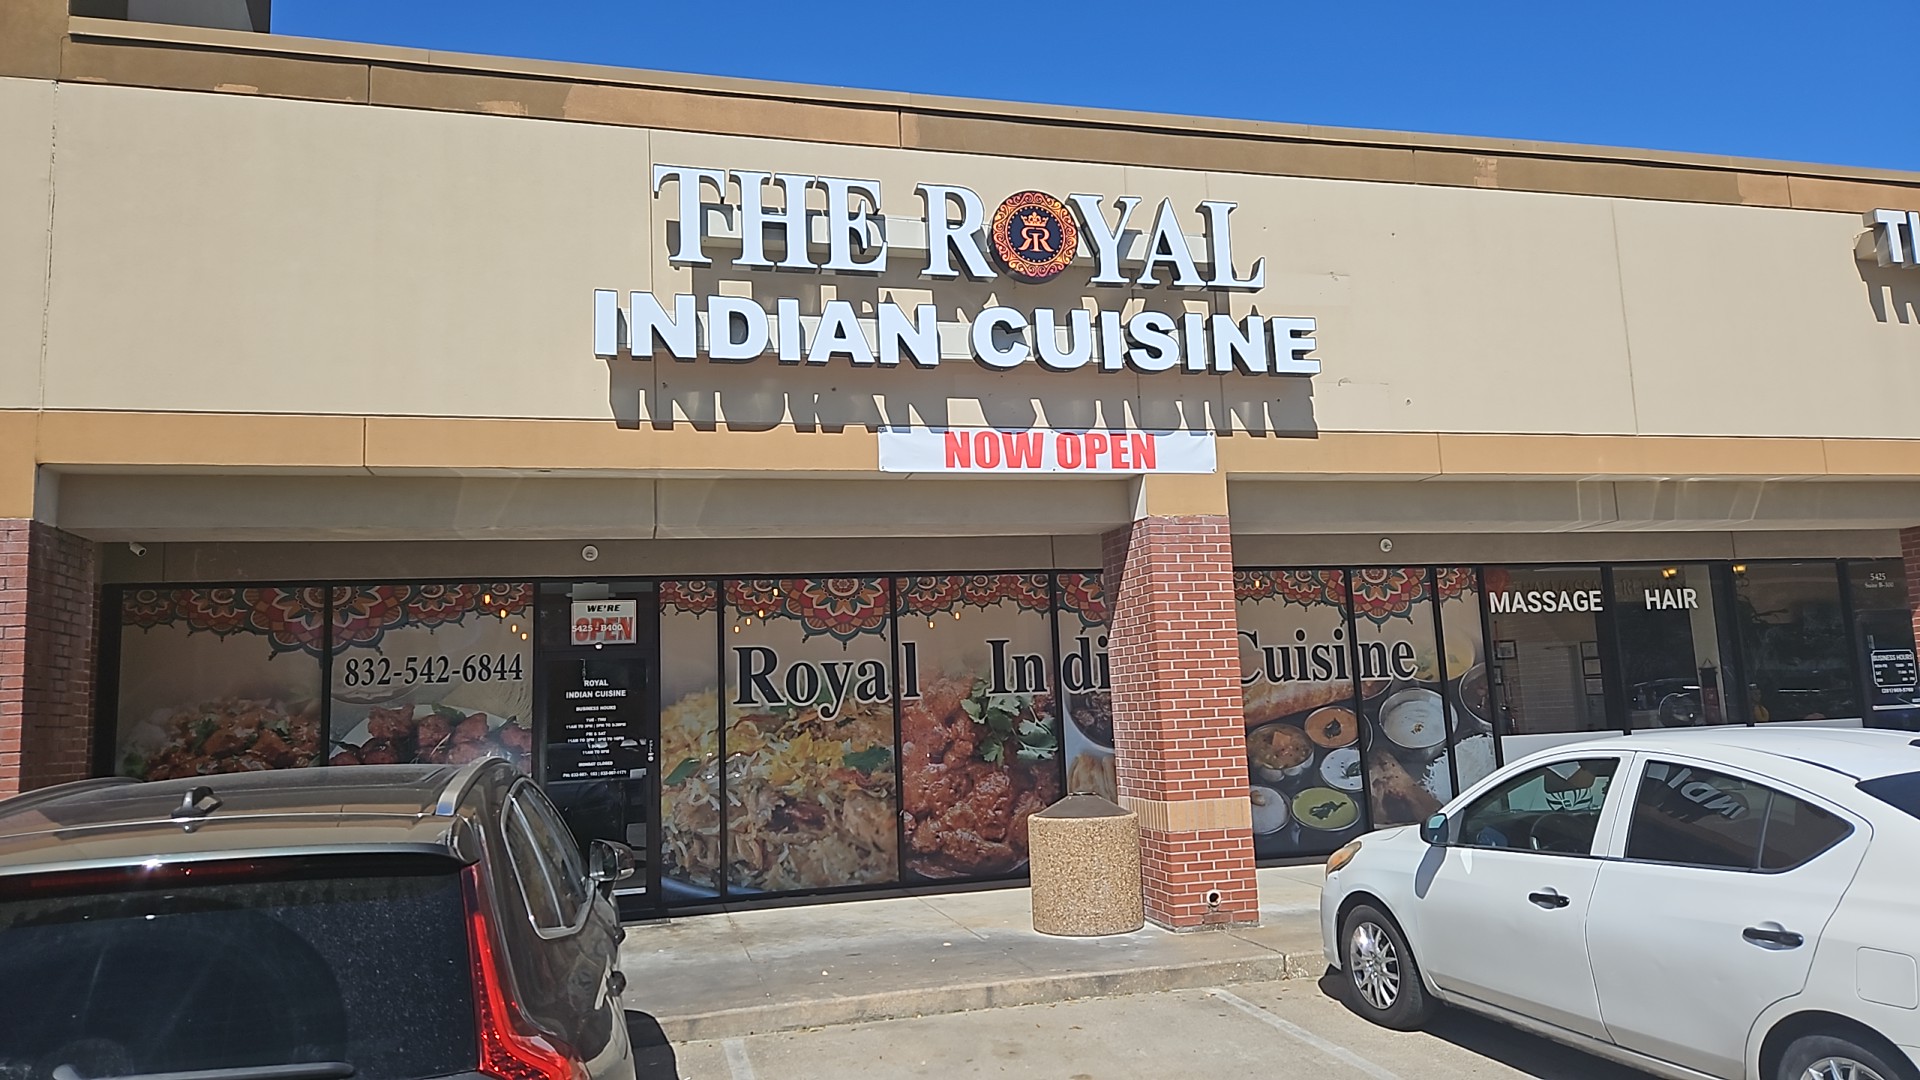 The Royal Indian Cuisine